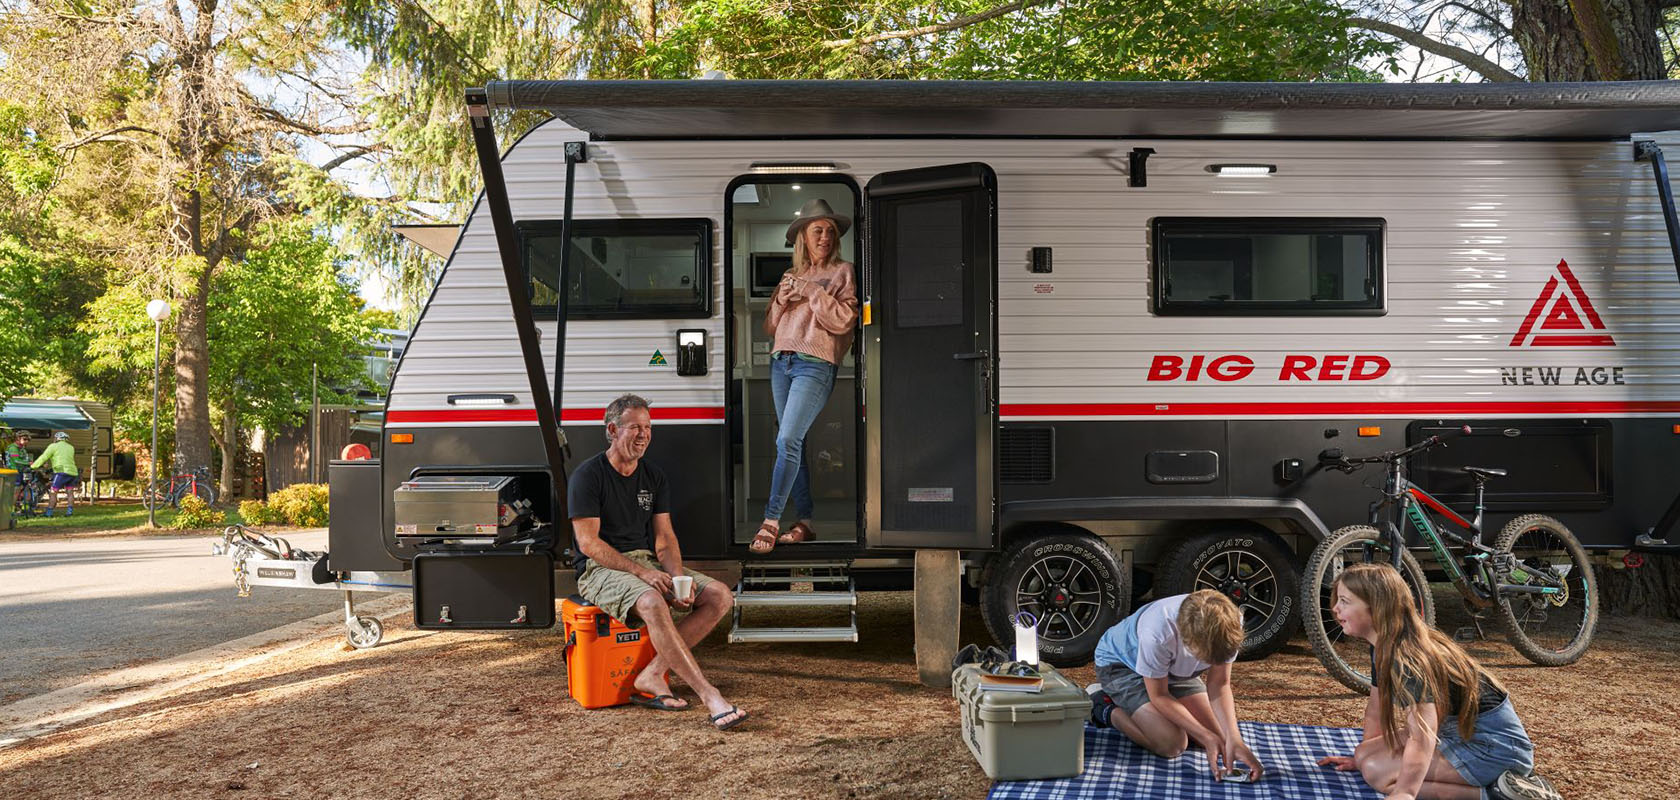 Where to buy accessories for caravans and motorhomes?